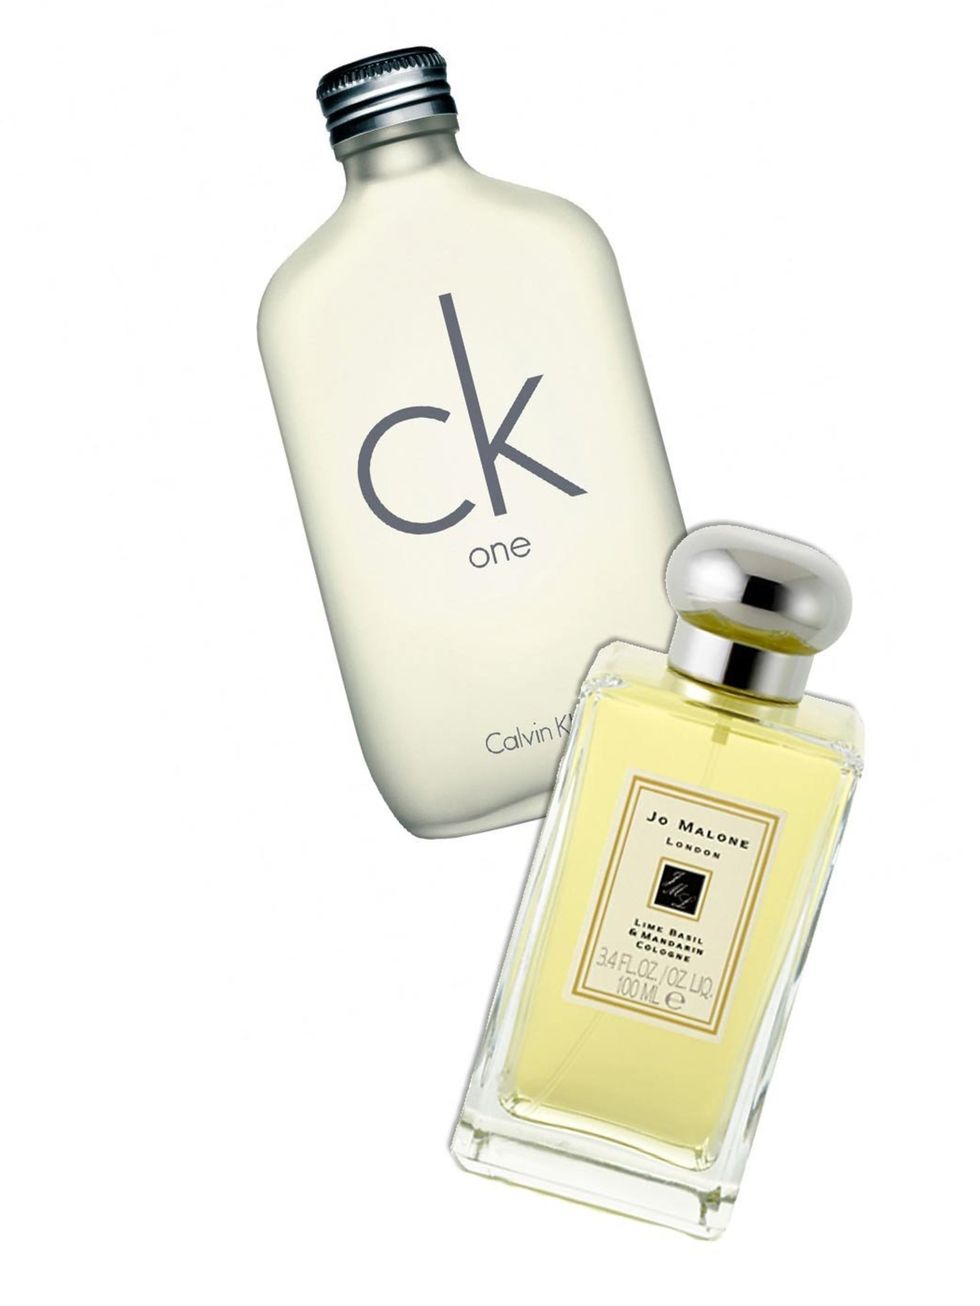 <p><strong>CITRUS:</strong>Fresh and zesty these scents sparkle with citrus notes like lemon, bergamot and grapefruit. </p><p><strong>YOU WEAR:</strong>Fresh, citrus scents like Jo Malone Lime Basil and Mandarin and CK One. </p>